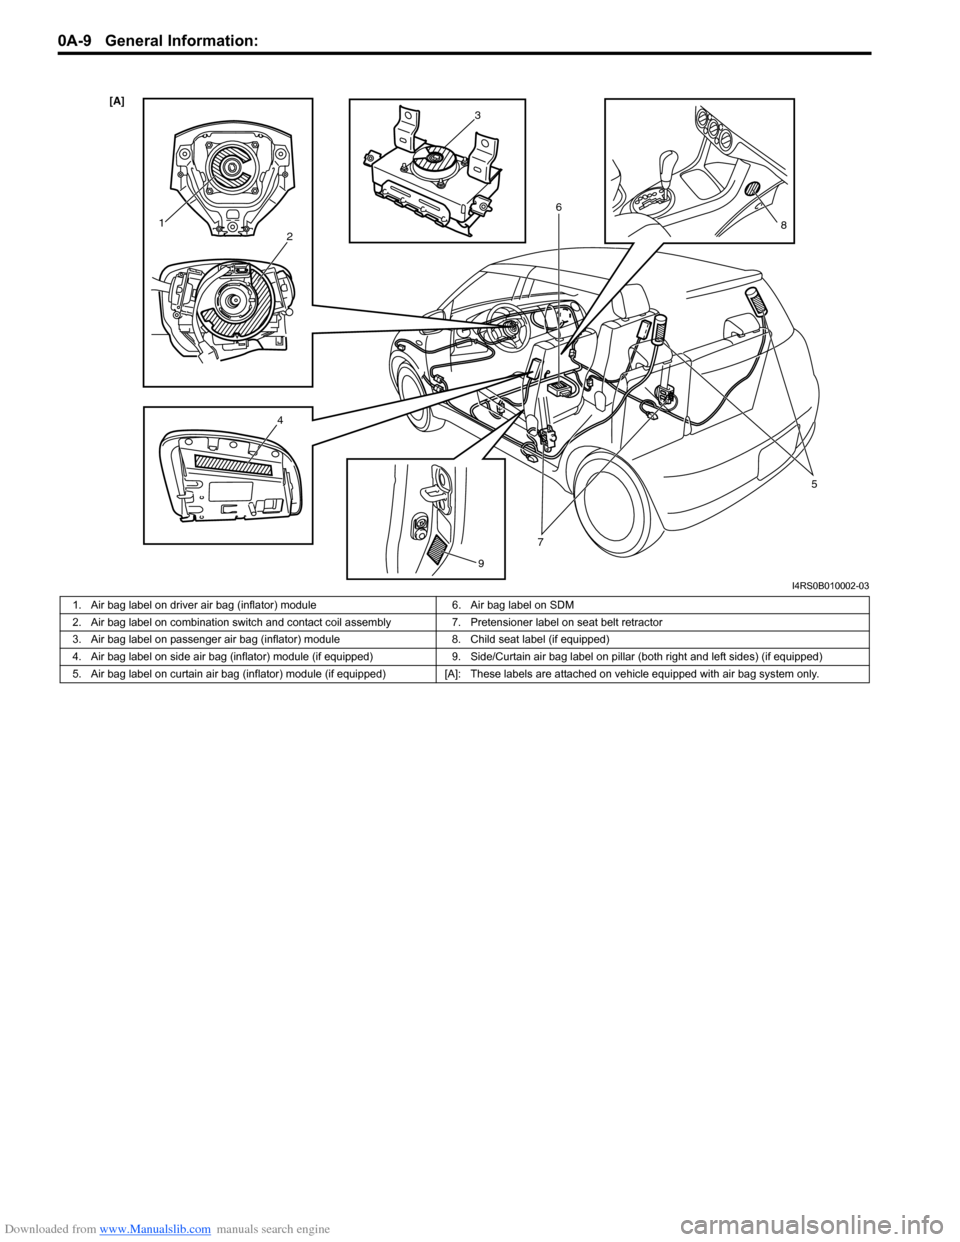 SUZUKI SWIFT 2004 2.G Service Workshop Manual Downloaded from www.Manualslib.com manuals search engine 0A-9 General Information: 
[A] 
12
4 5
6
7 8
9
3
I4RS0B010002-03
1. Air bag label on driver air bag (inflator) module 6. Air bag label on SDM
2